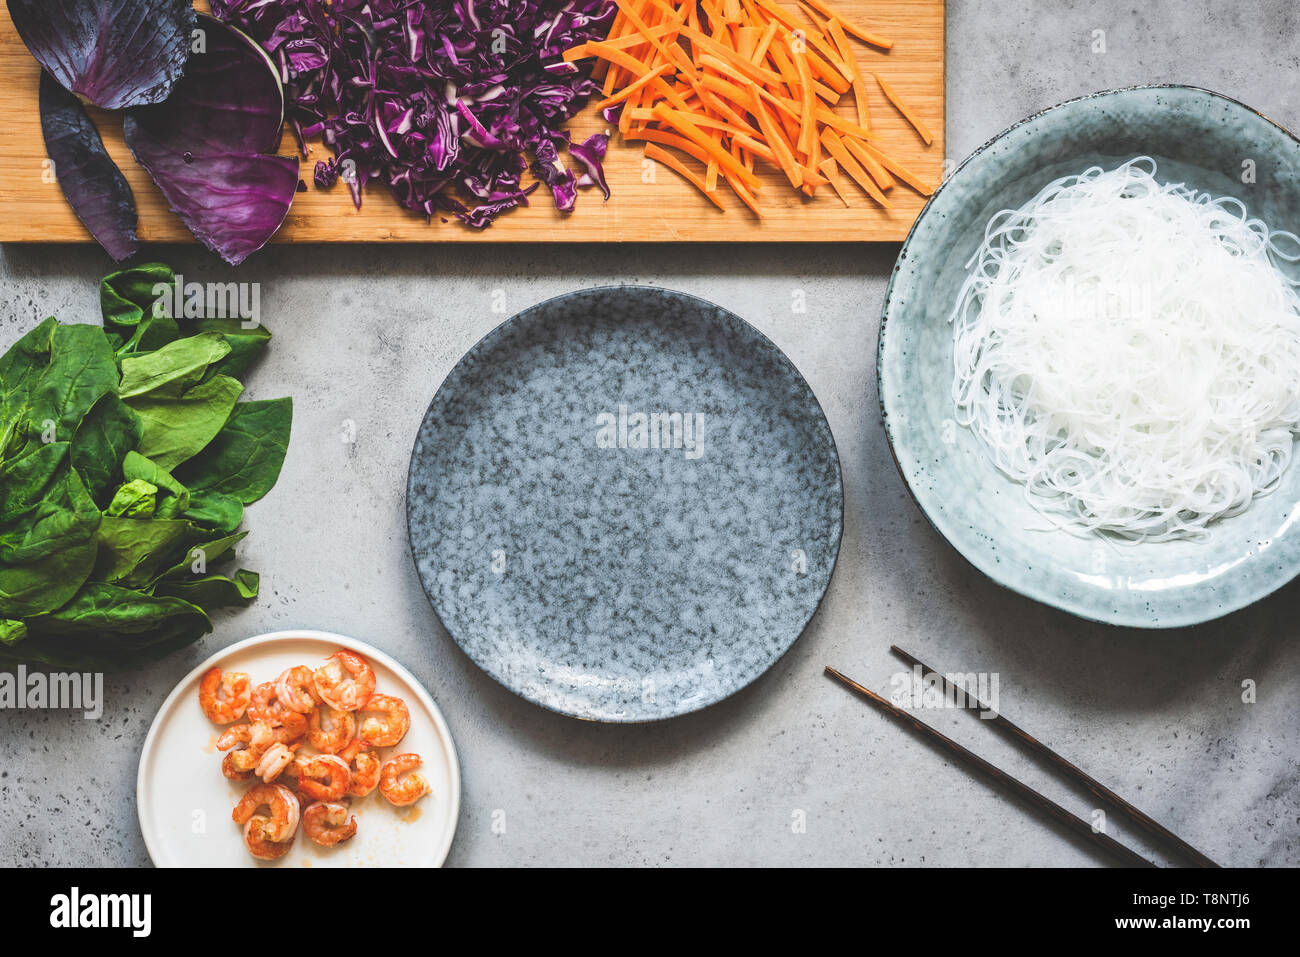 Healthy food preparation background. Asian cuisine food. Red cabbage, cucumber, glass rice noodles, spinach and shrimps. Top view. Grey concrete backd Stock Photo